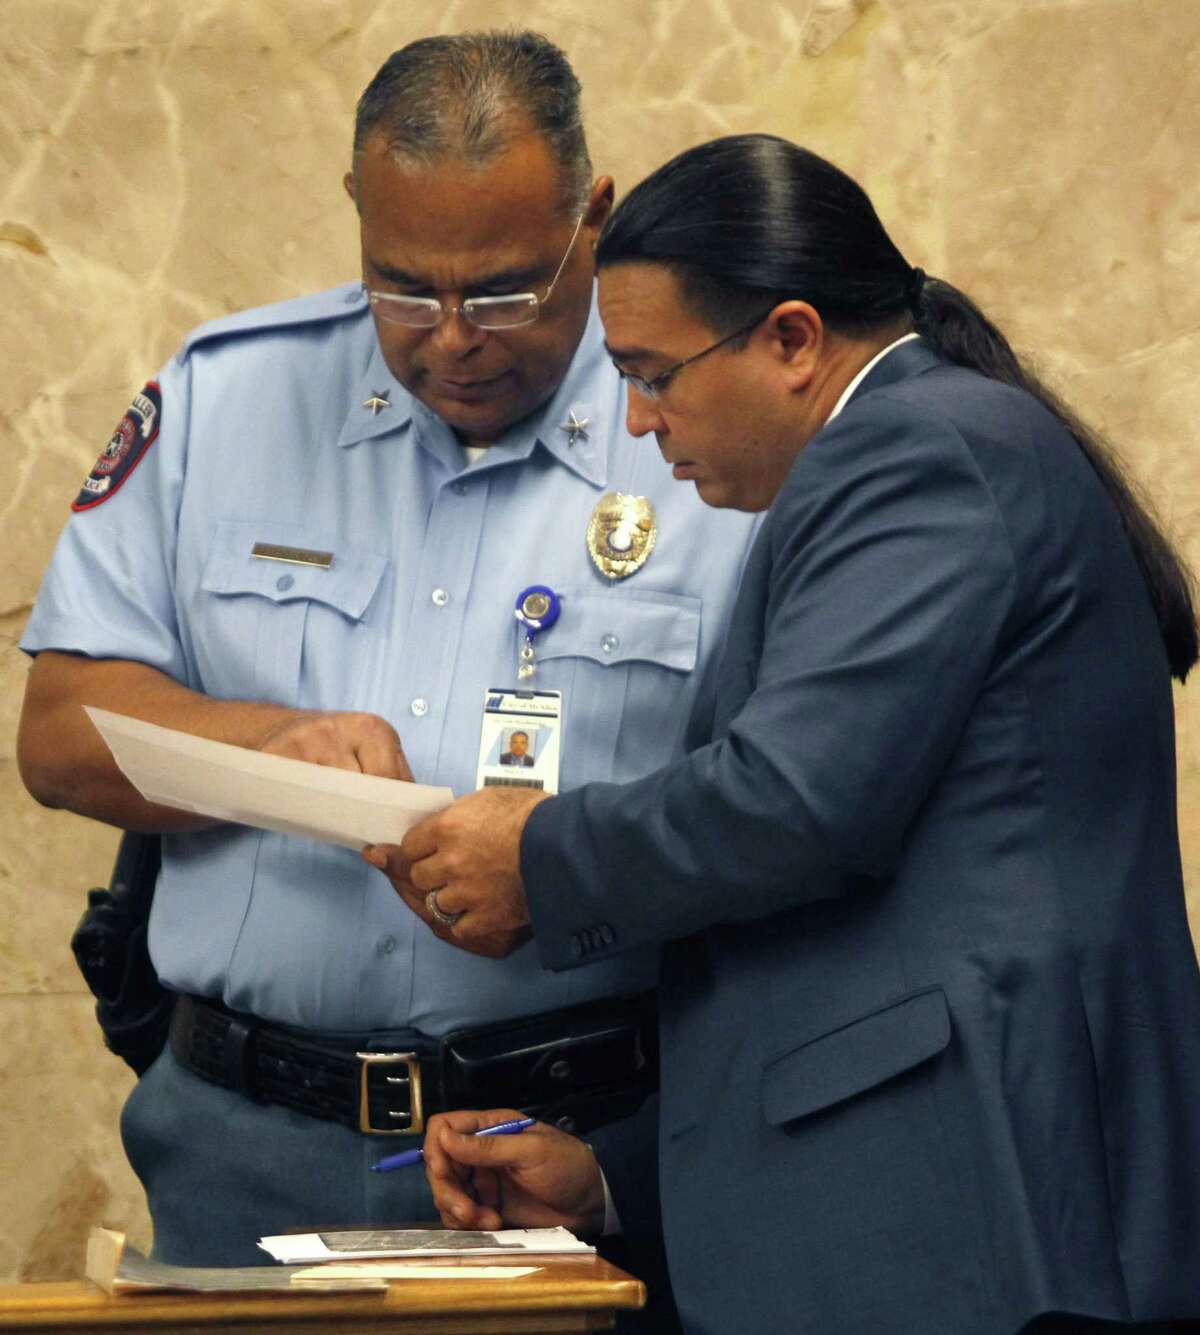 Defense attorney O. Rene Flores (right) talks with McAllen Police Chief Victor Rodriguez during a break in testimony Monday in John Feit’s trial for the 1960 murder of Irene Garza in the 92nd state District Court at the Hidalgo County Courthouse in Edinburg.